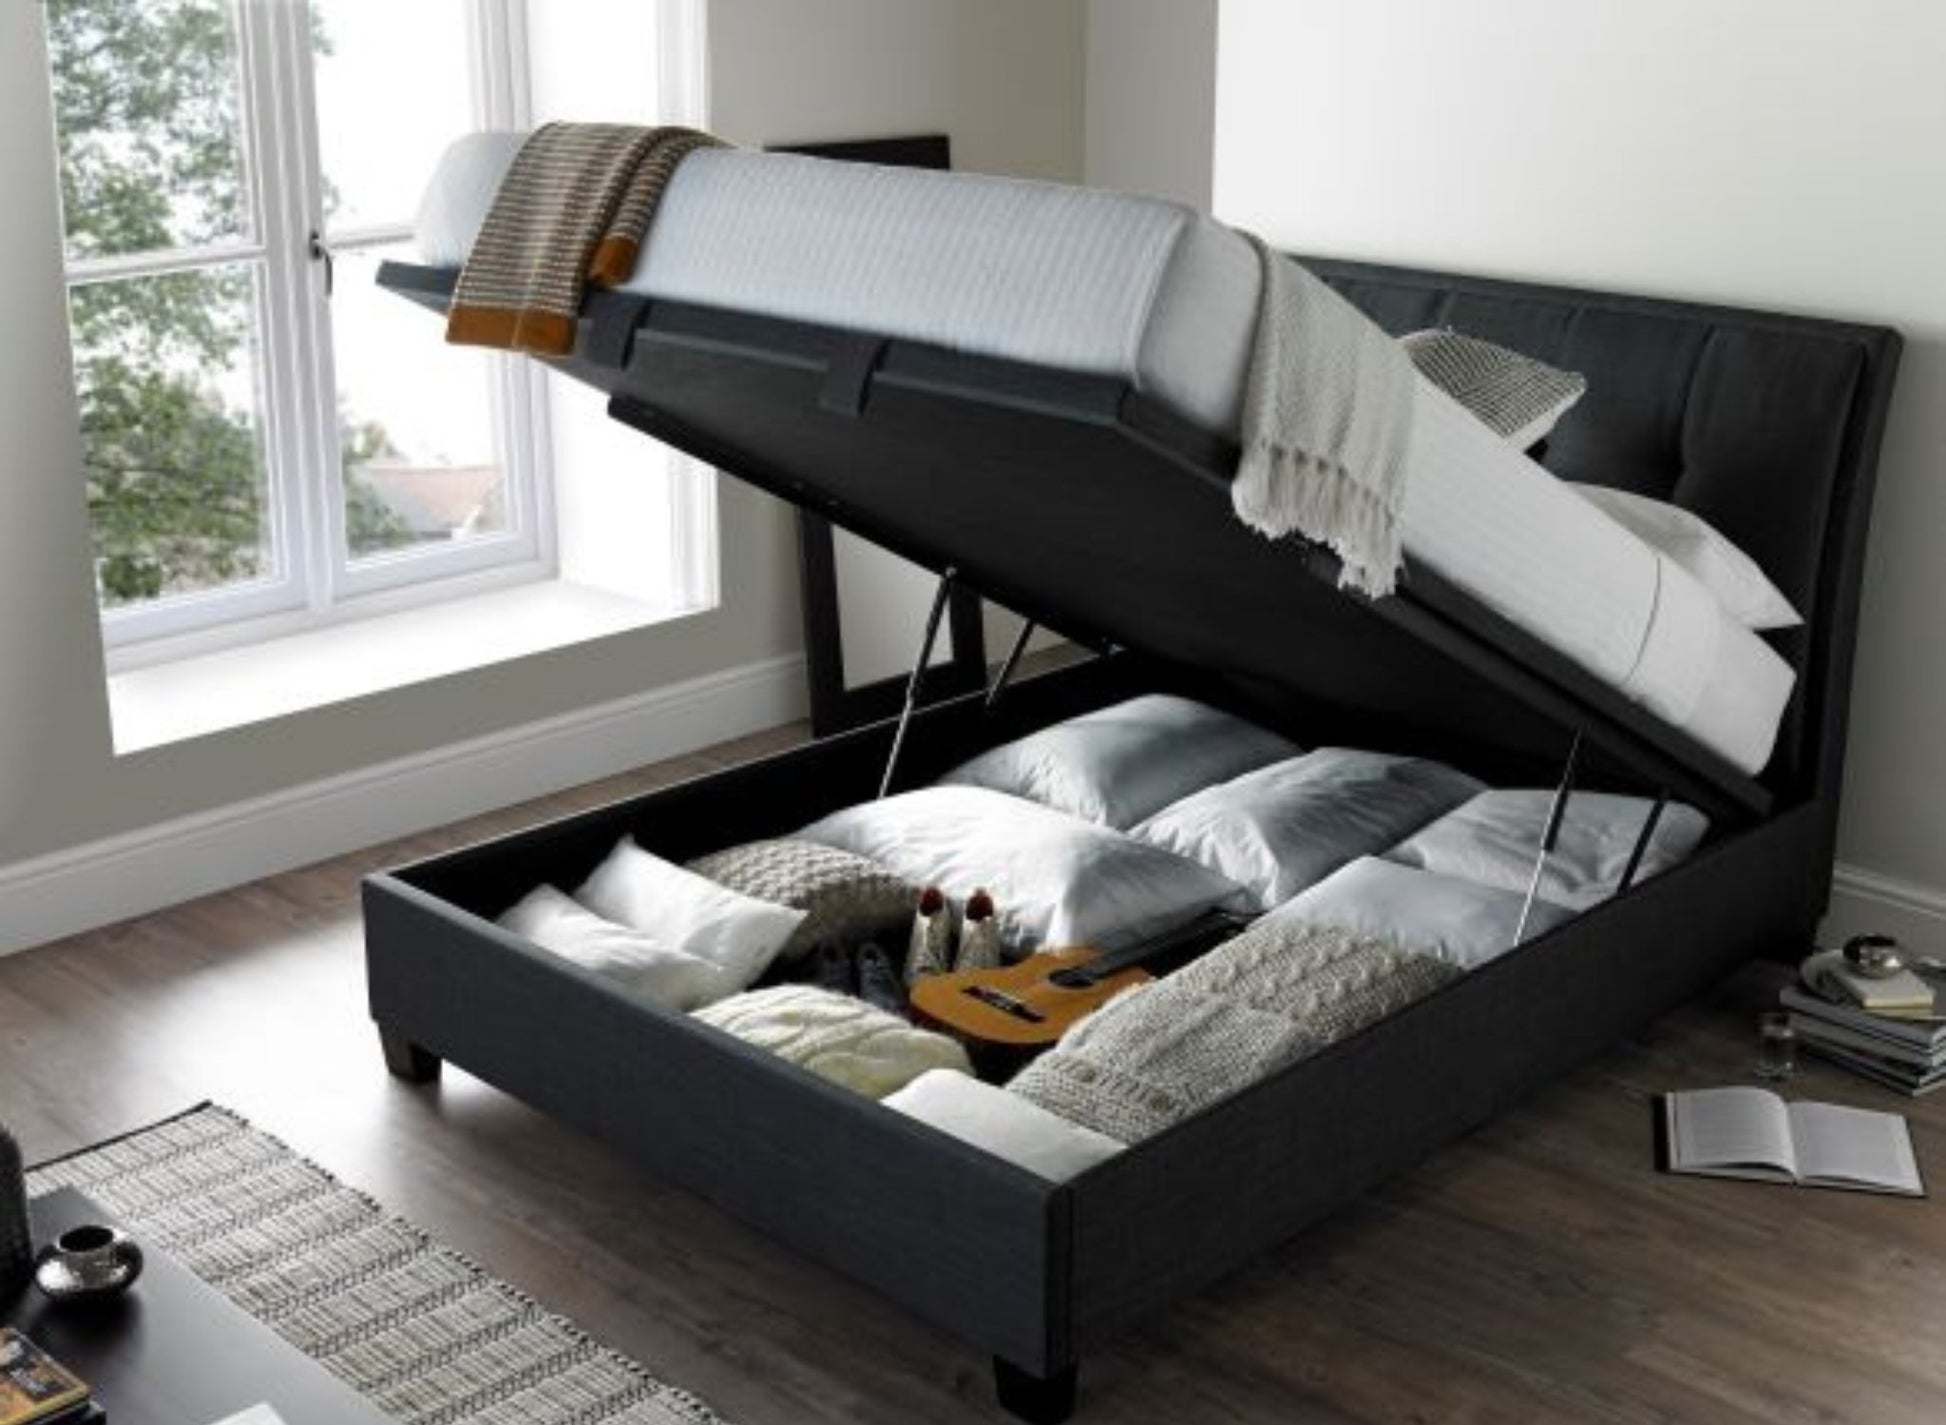 Accent Ottoman Storage Bed Frame - Oatmeal - TV Beds NorthwestACC135OA